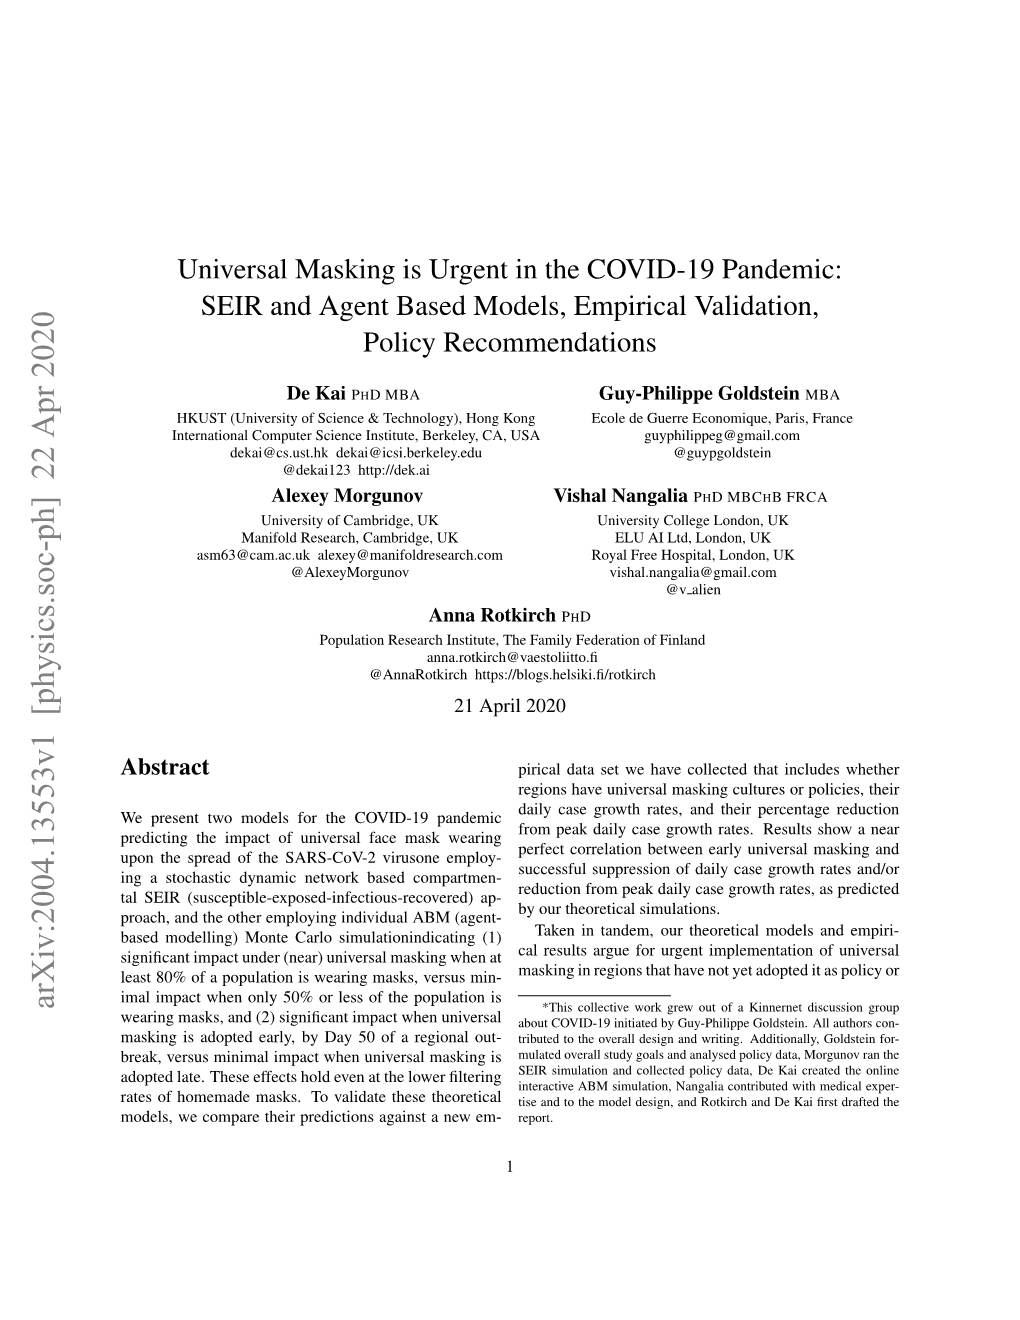 Universal Masking Is Urgent in the COVID-19 Pandemic: SEIR and Agent Based Models, Empirical Validation, Policy Recommendations